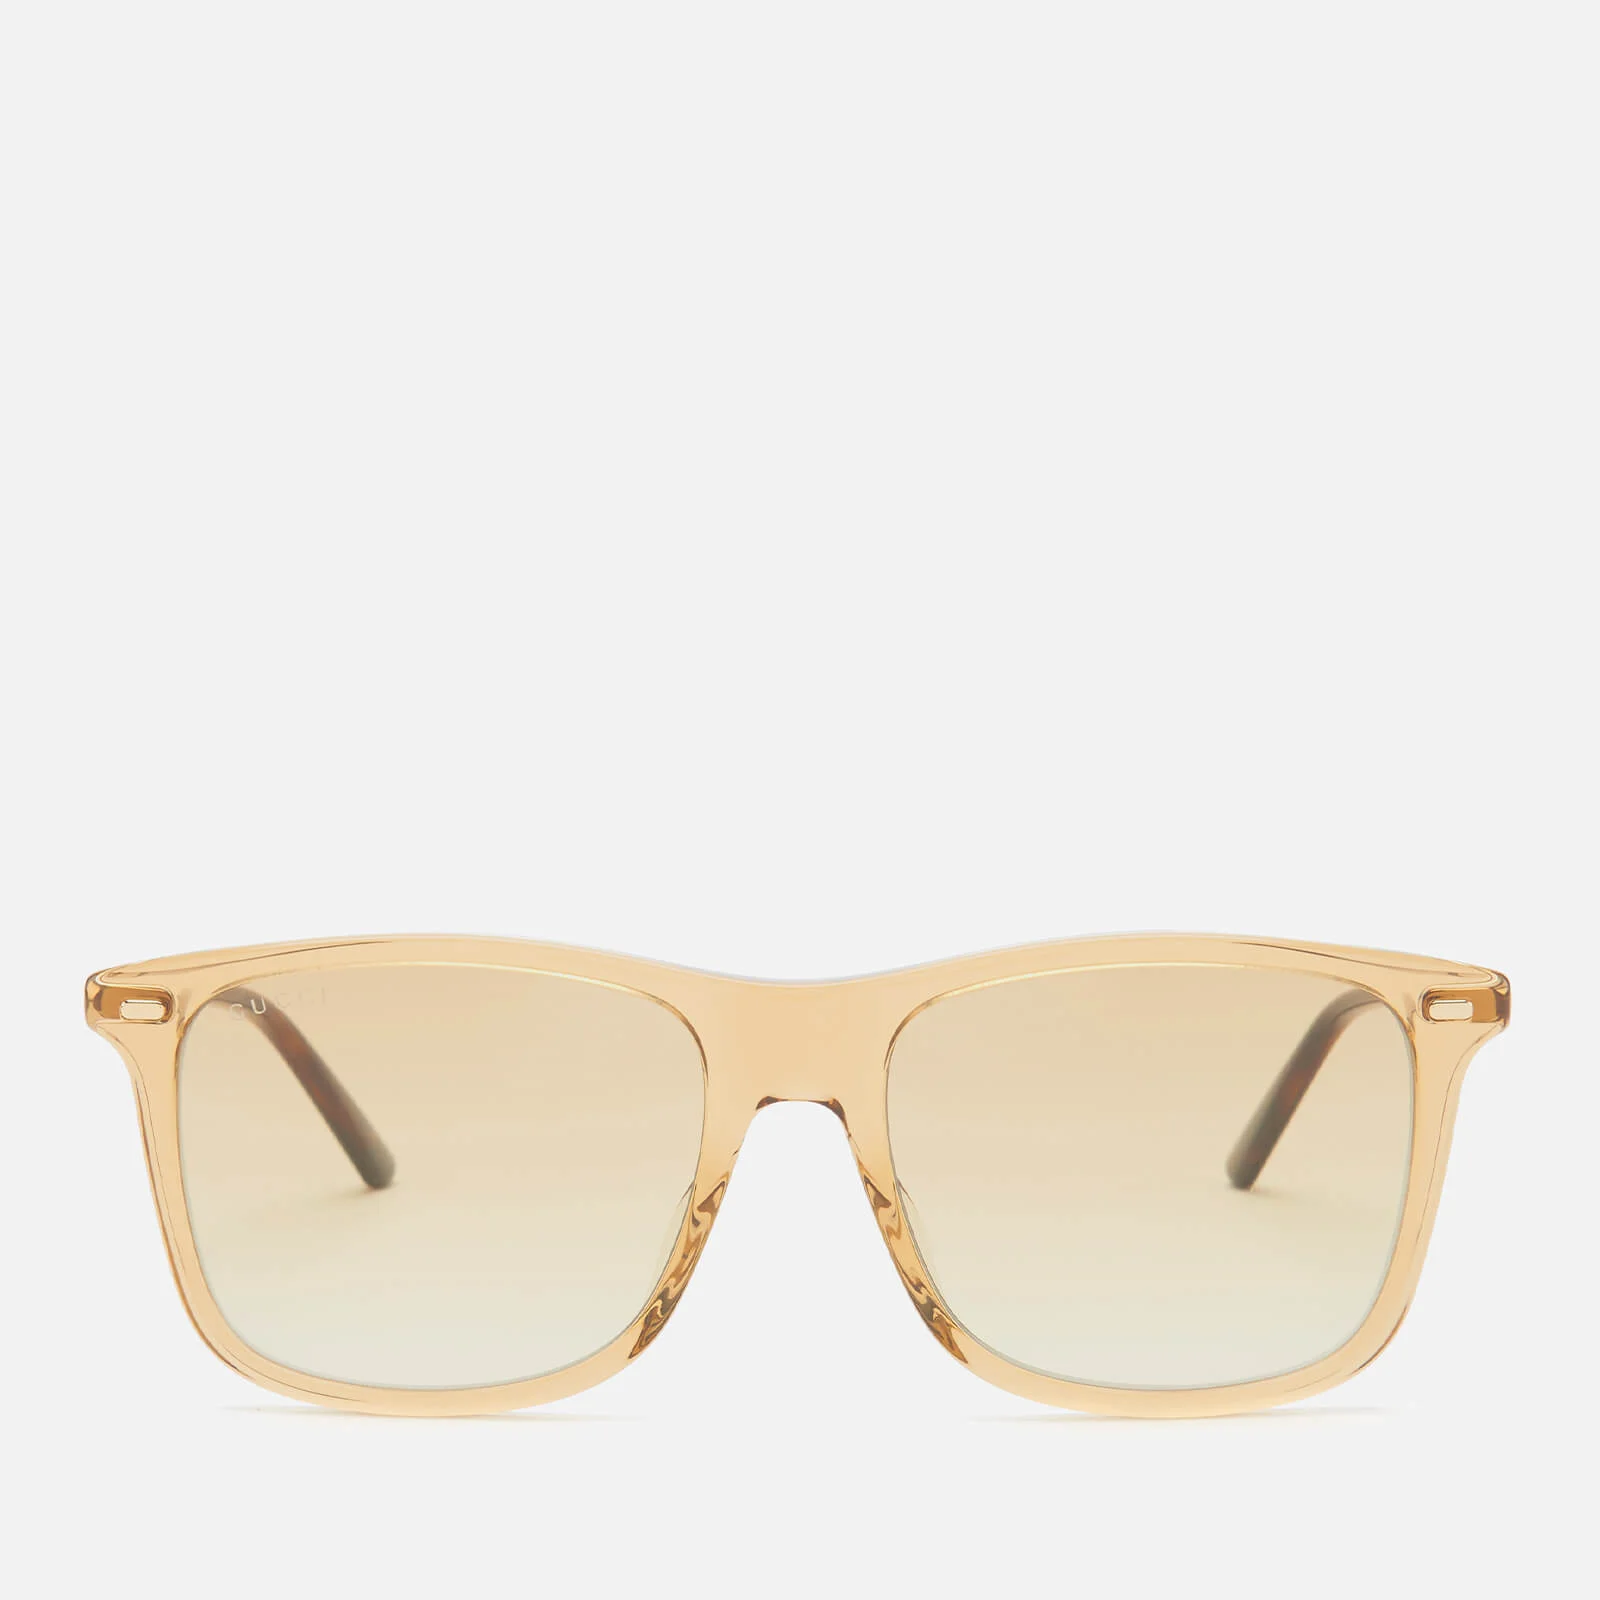 Gucci Men's Cylindrical Web Square Frame Sunglasses - Brown/Gold/Brown Image 1